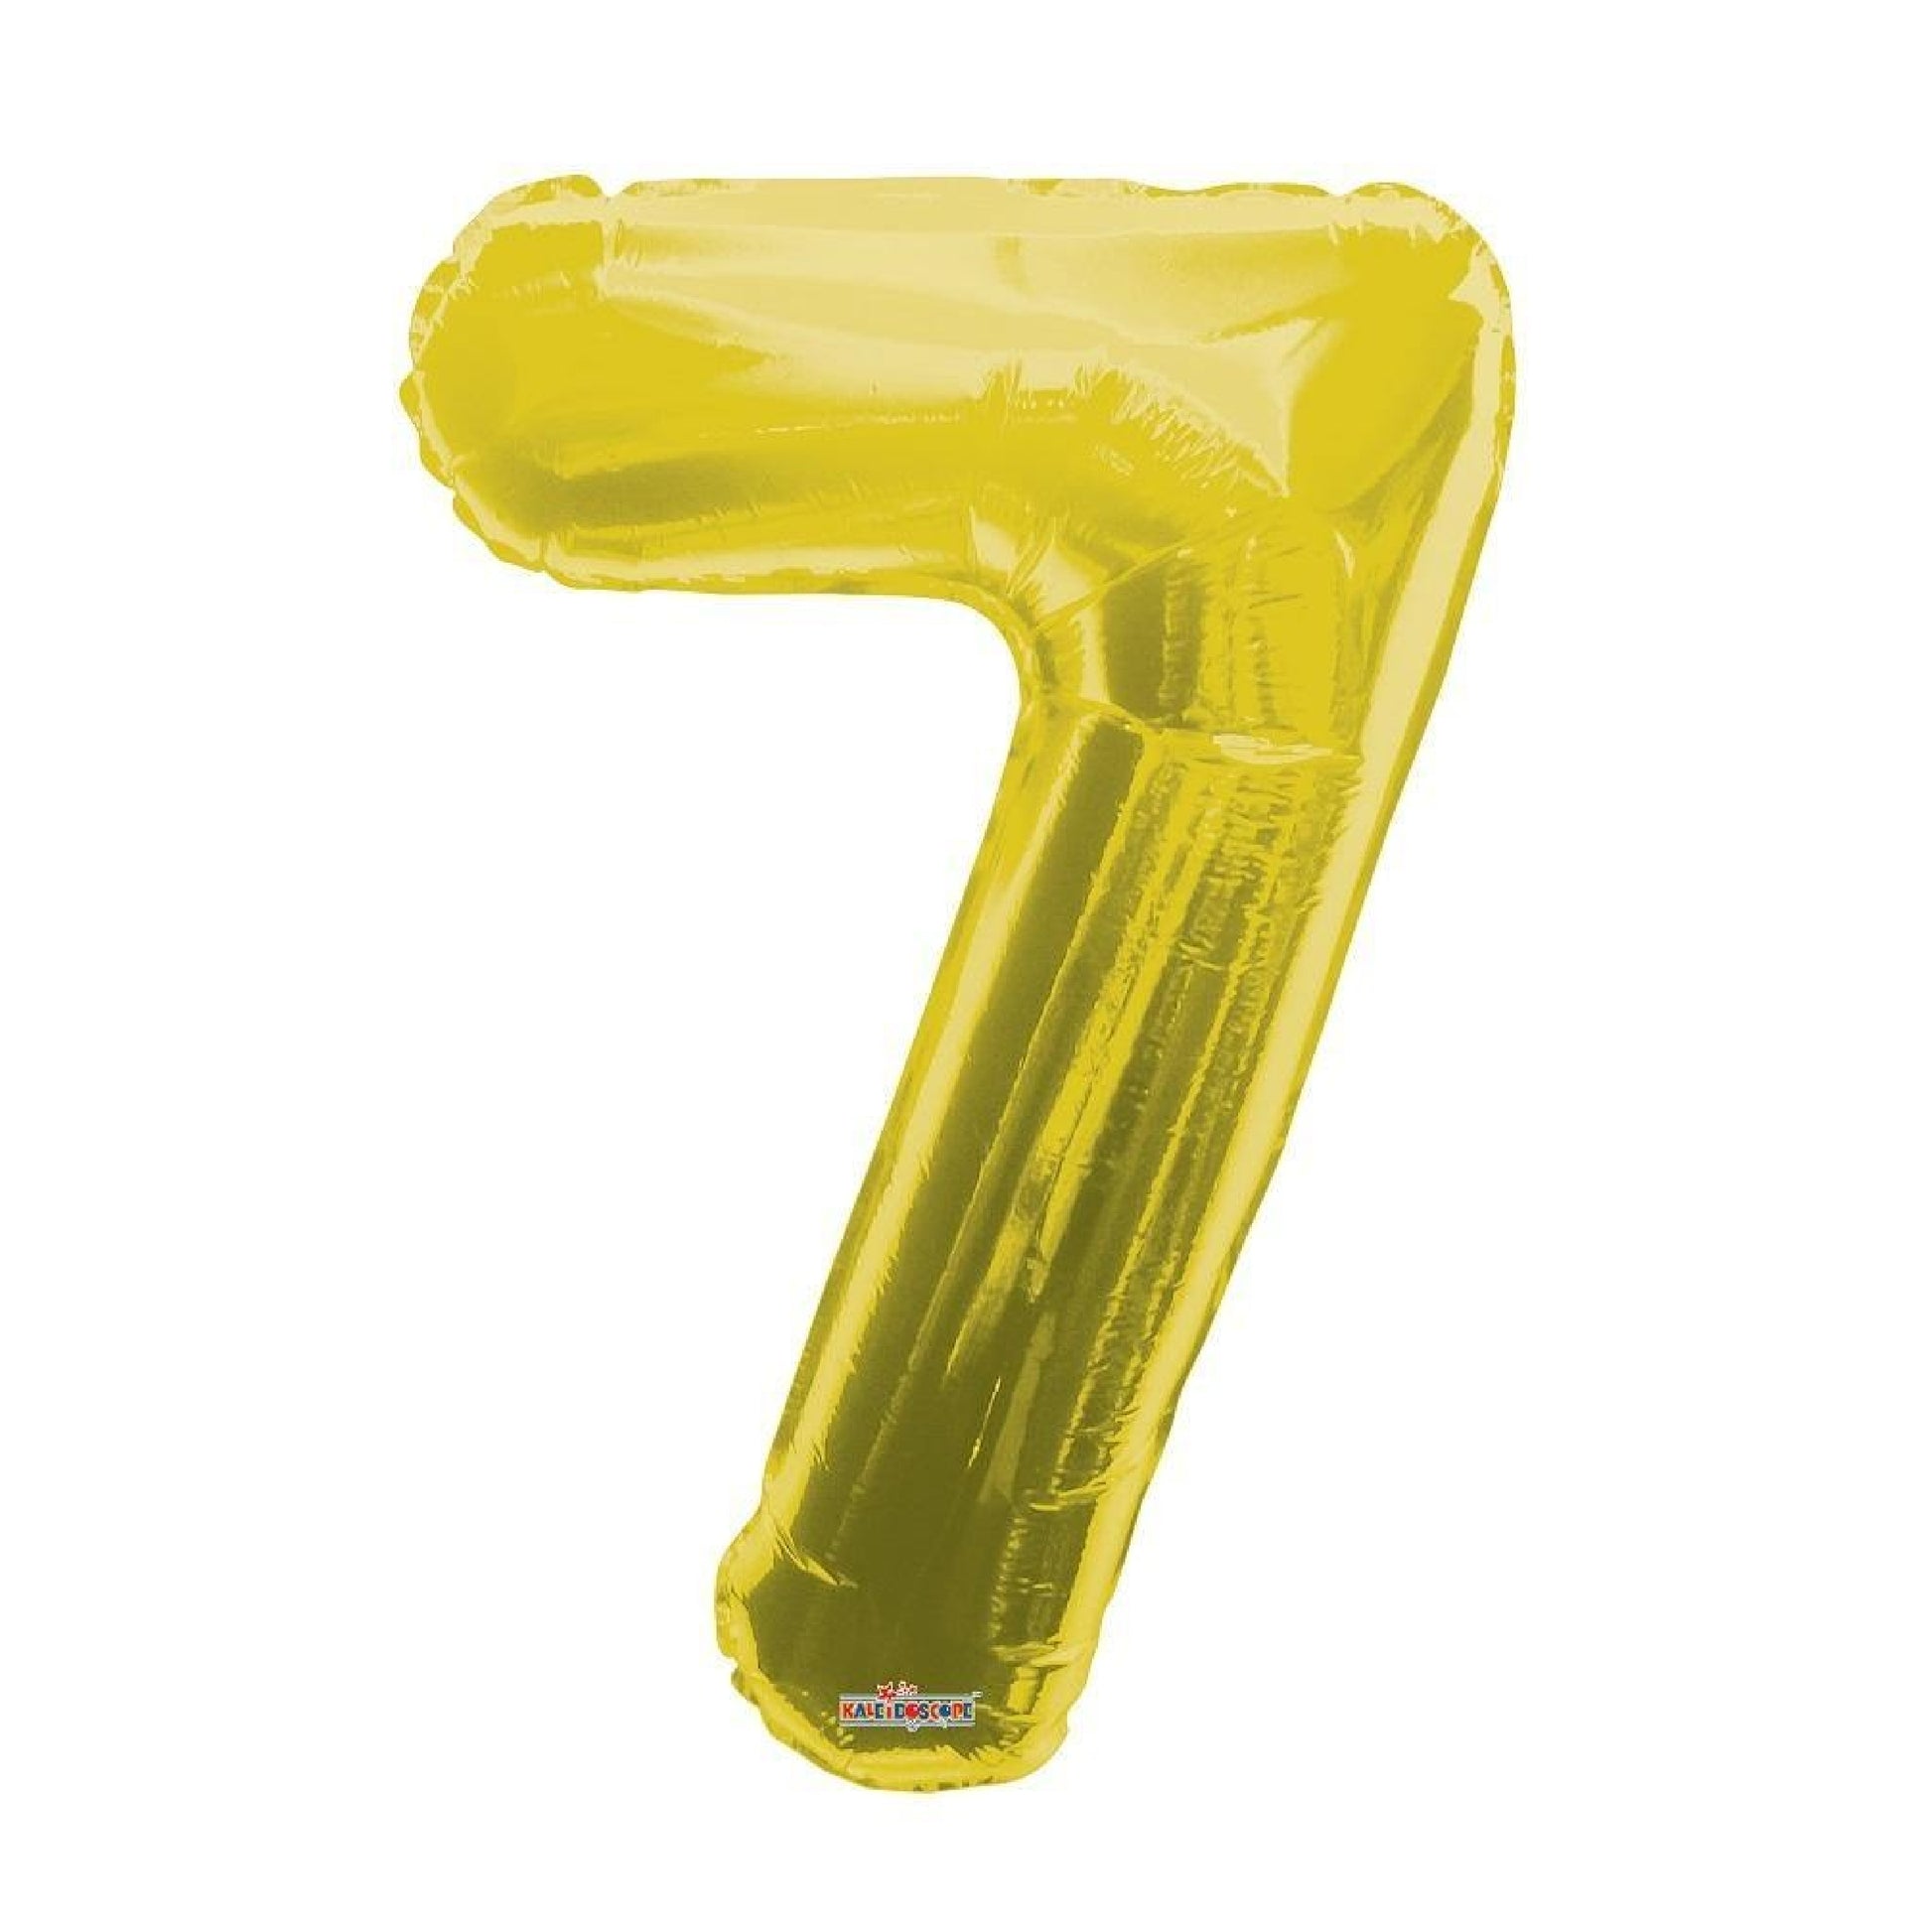 Vancouver Helium filled gold foil number balloon 7